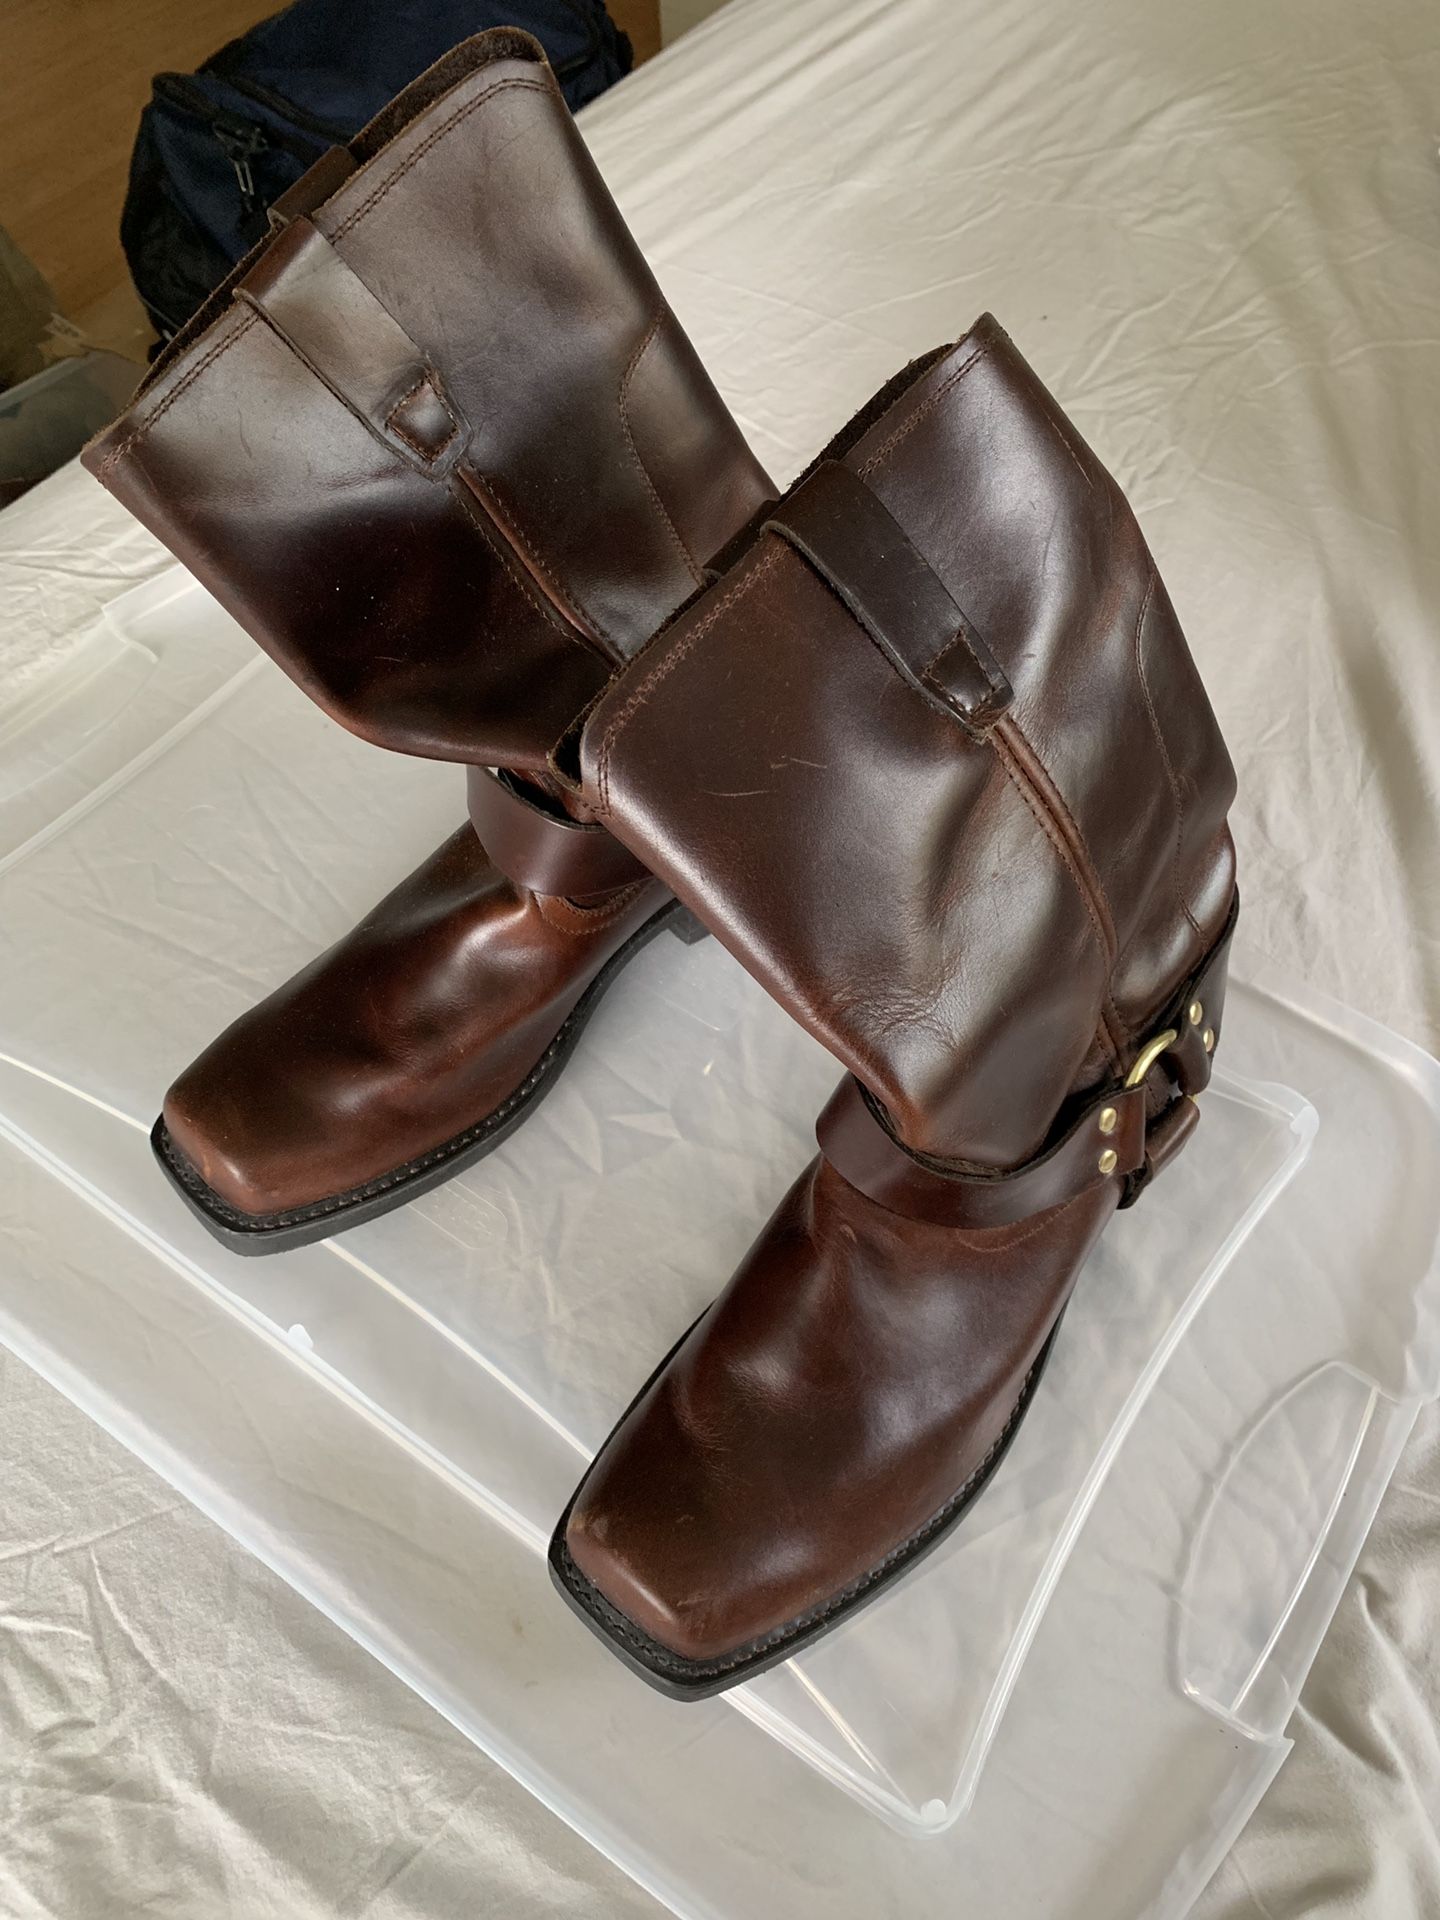 Durango Boots (Harness model). Size 11. Barely Used!